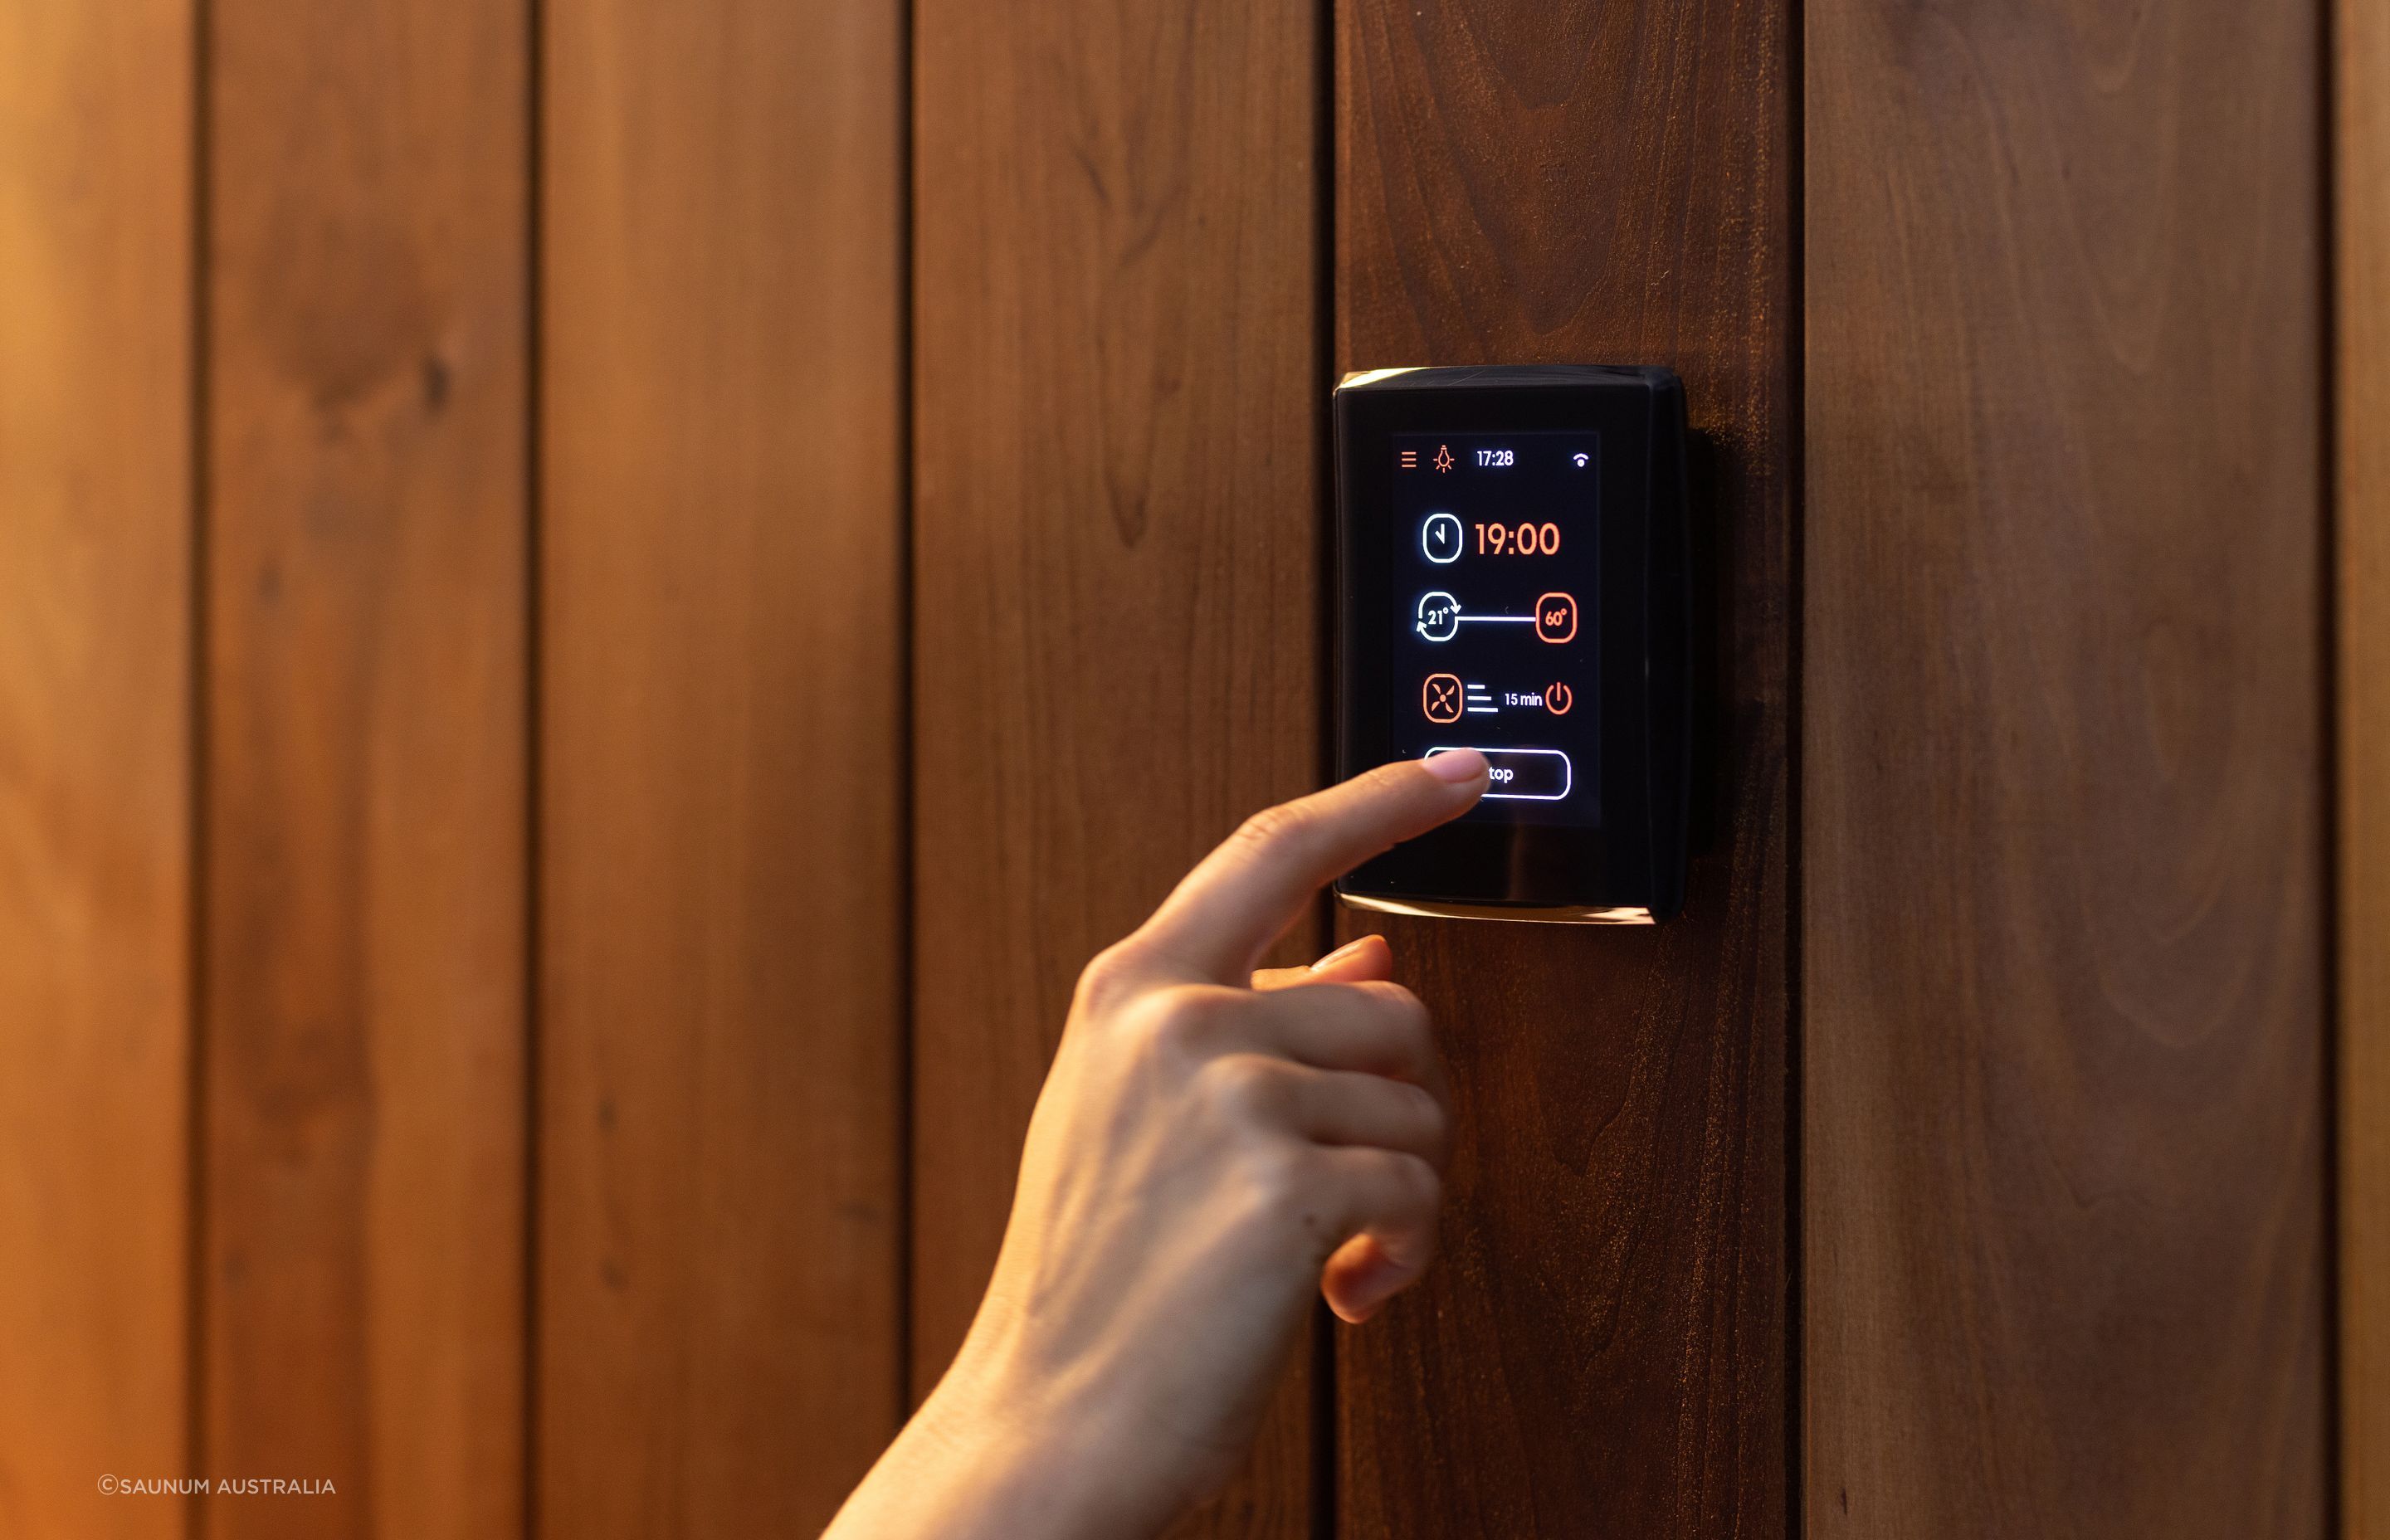 The Saunum Leil app allows you to control your sauna with a few taps on the screen.